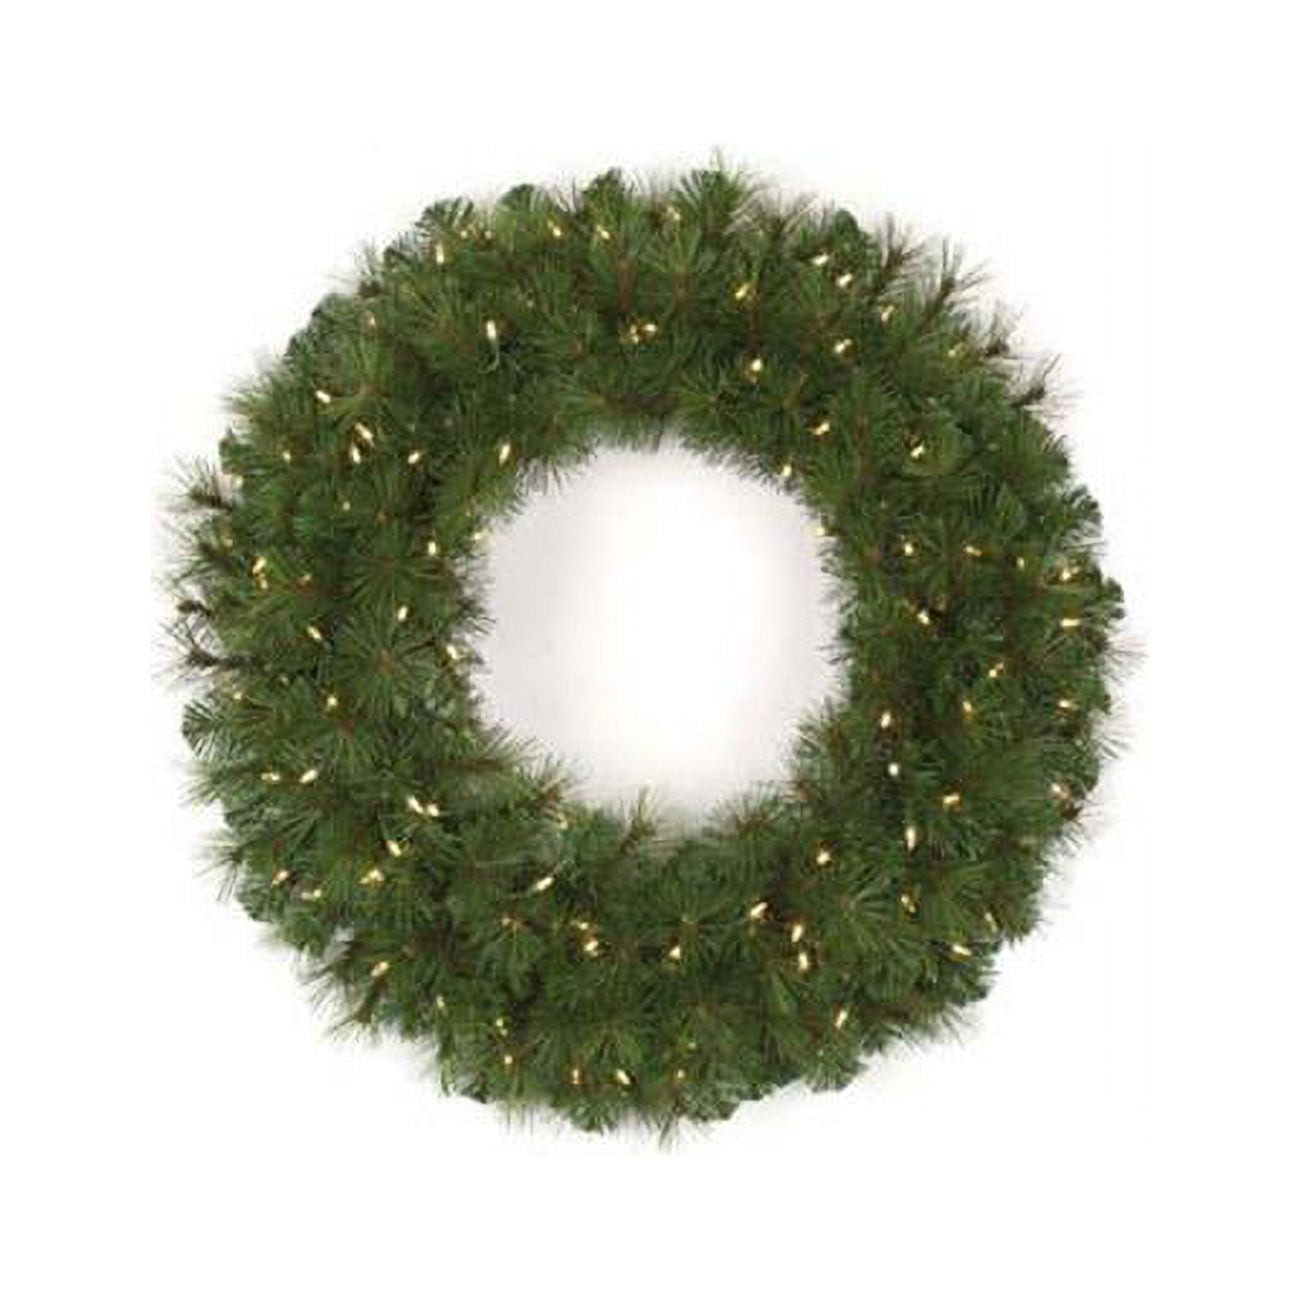 Picture of Autograph Foliages C-140600 36 in. Mika Pine Wreath, Green